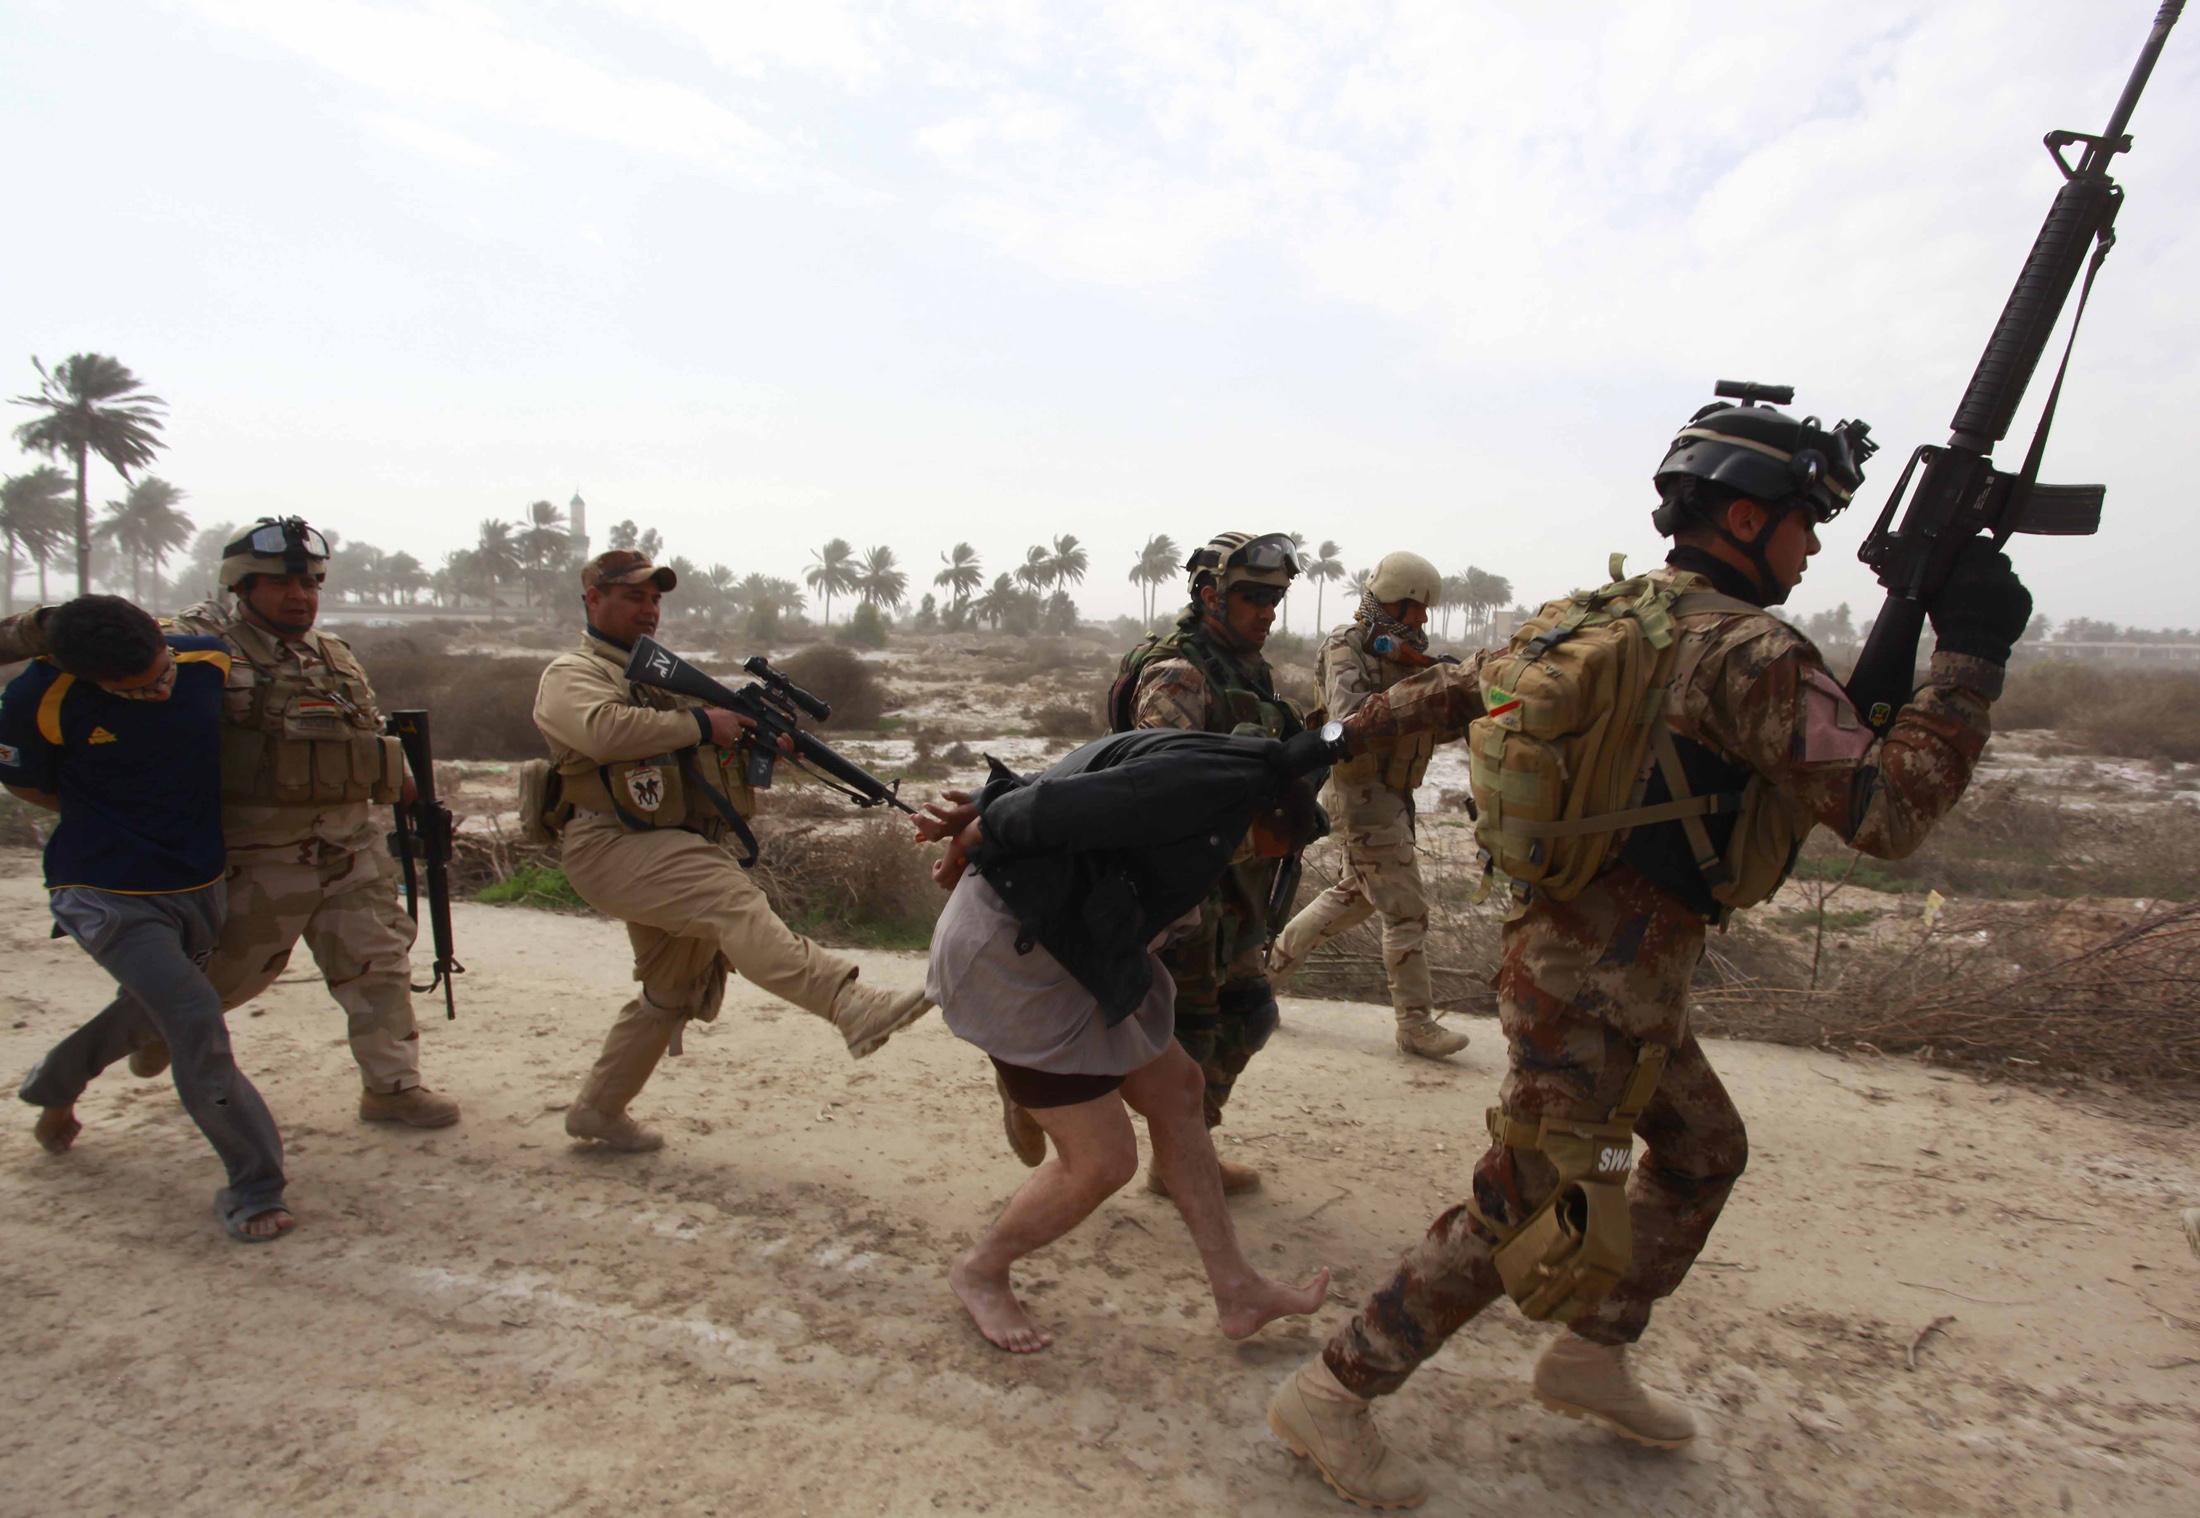 Members of the Iraqi security forces arrest a suspected Isis fighter in Jurf al Sakhar, 15 February 2014